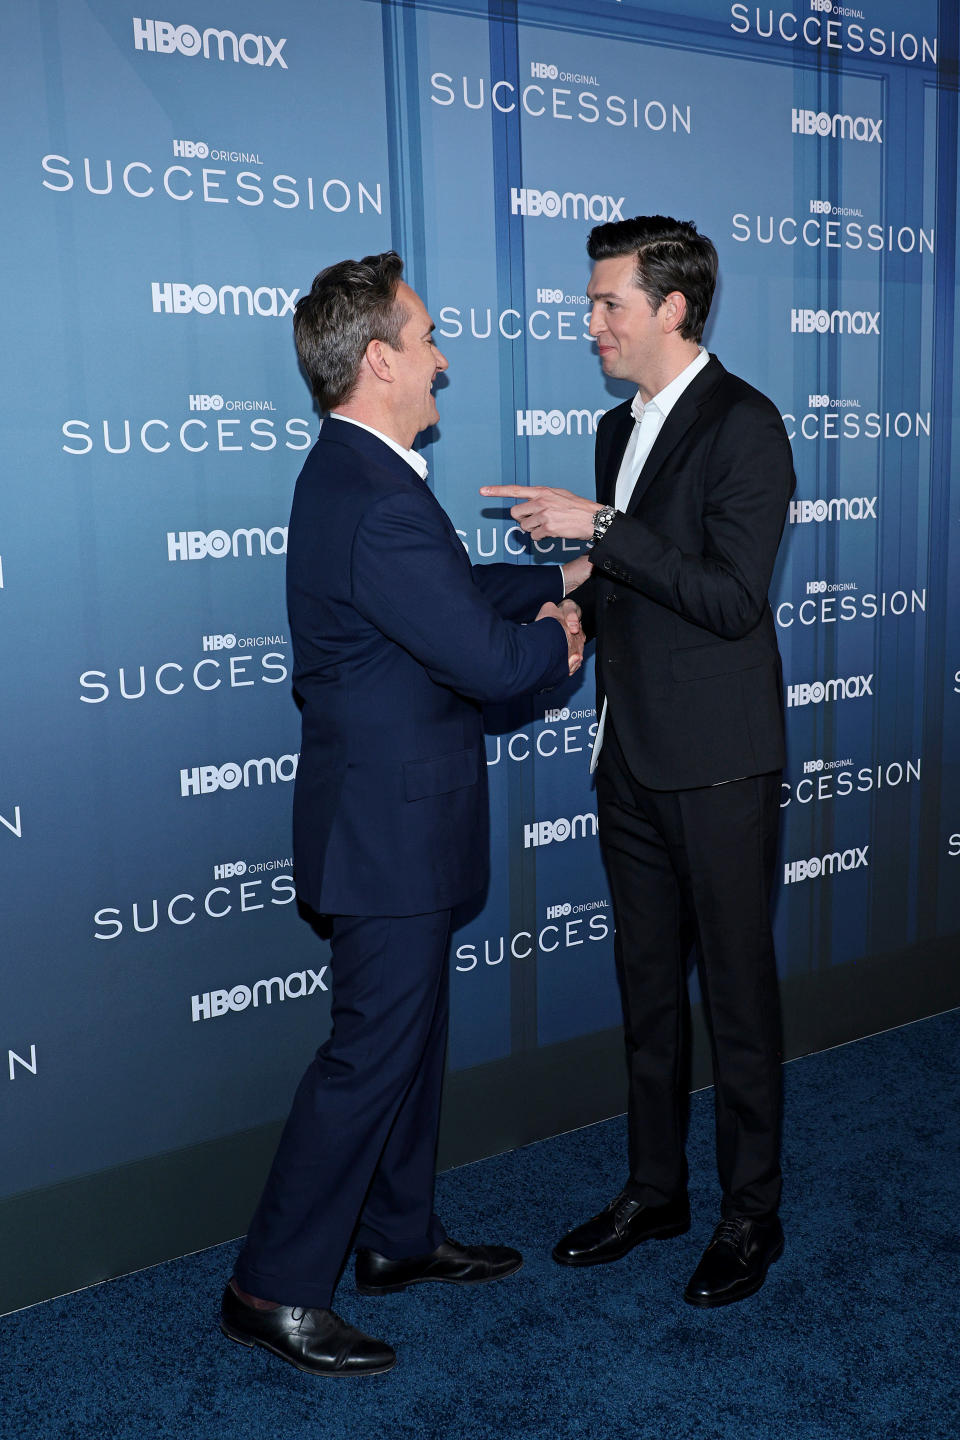 NEW YORK, NEW YORK - MARCH 20: (L-R) Matthew Macfadyen and Nicholas Braun attend HBO's "Succession" Season 4 Premiere at Jazz at Lincoln Center on March 20, 2023 in New York City. (Photo by Dimitrios Kambouris/WireImage)